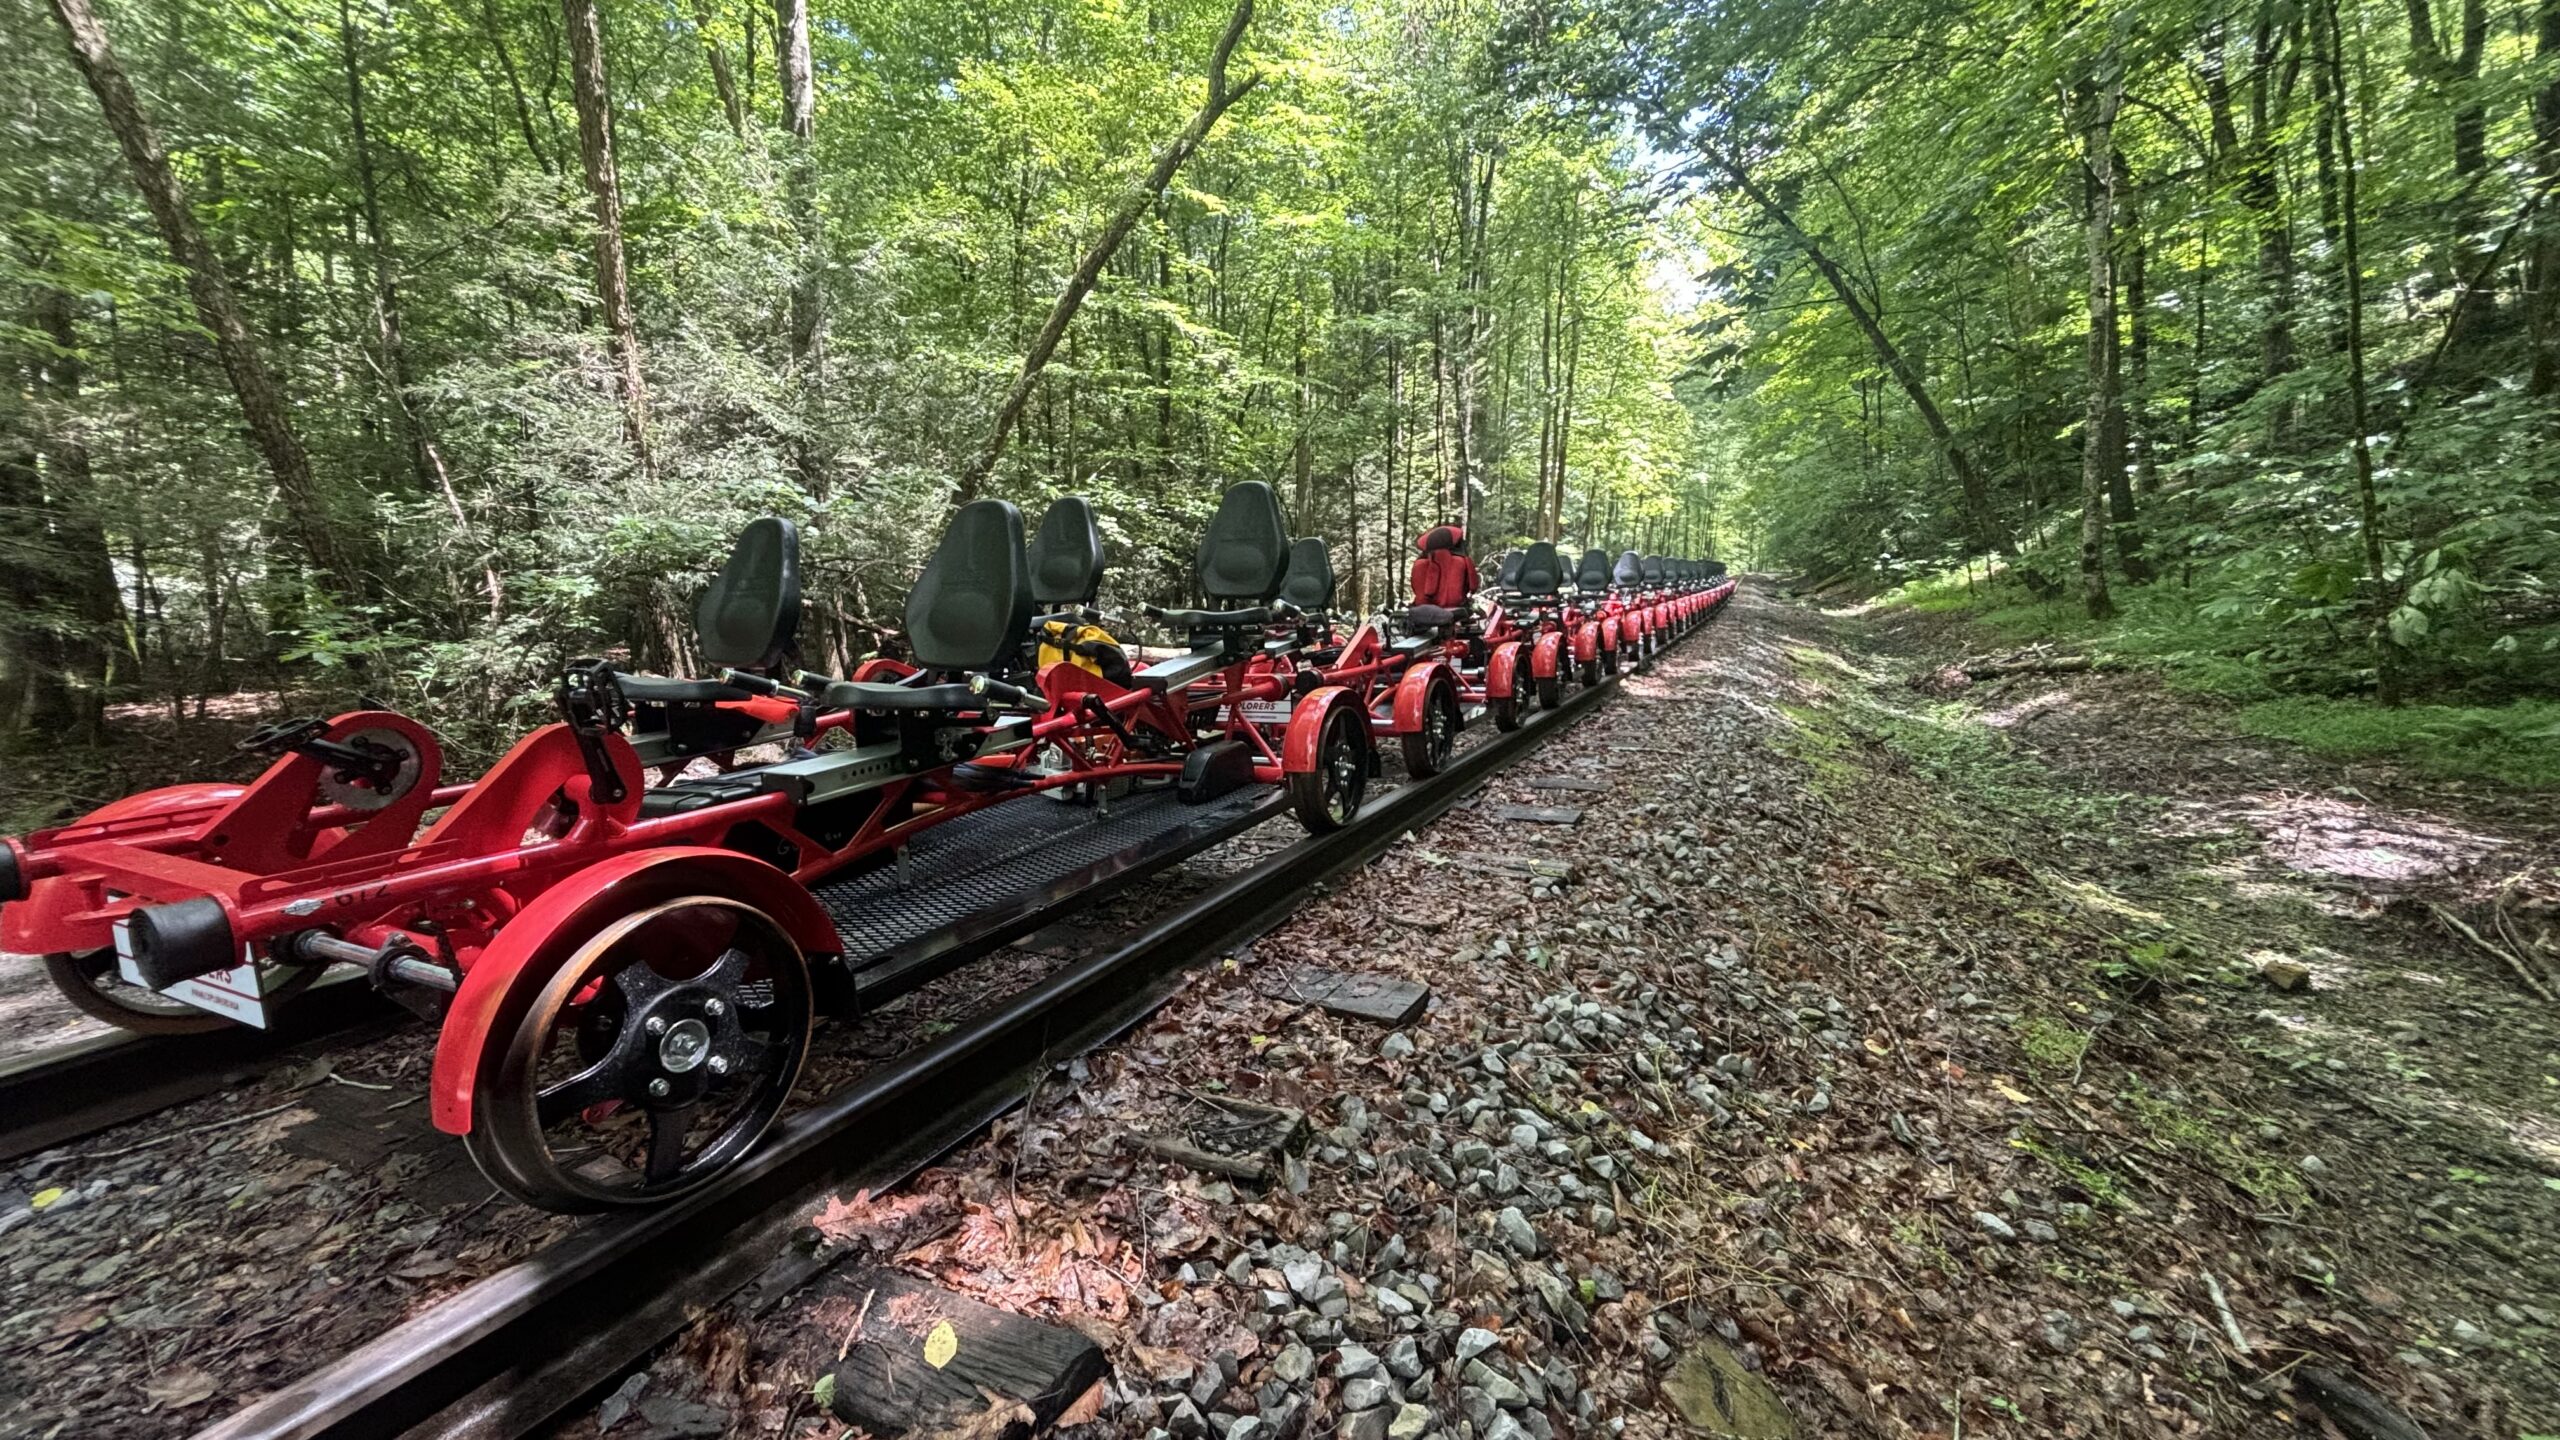 Ribbon cut on new rail riders attraction in Clay County – WV MetroNews